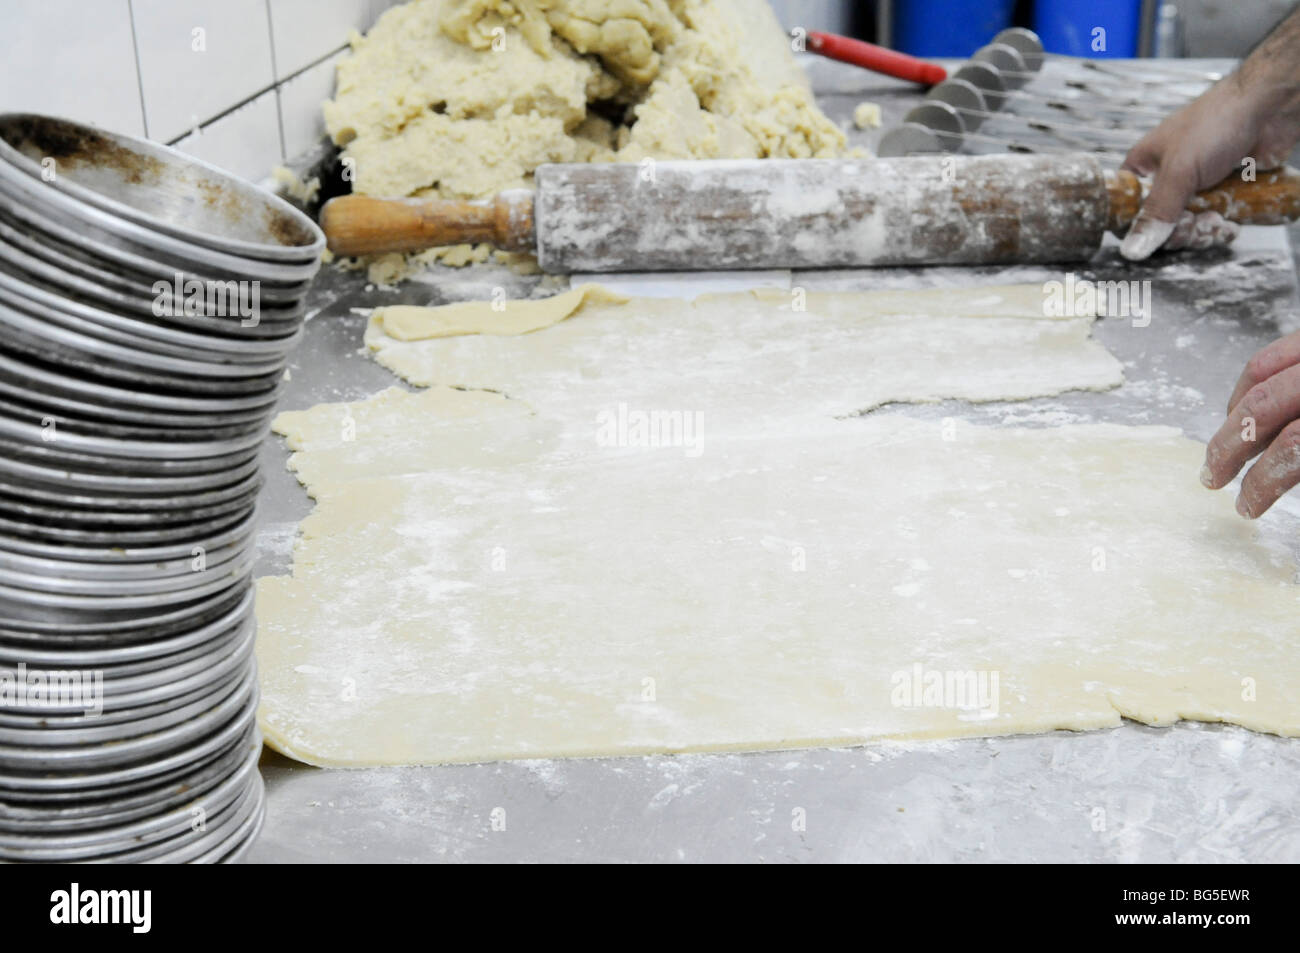 Industrial Bakery. Baker kneading and flattening dough Stock Photo